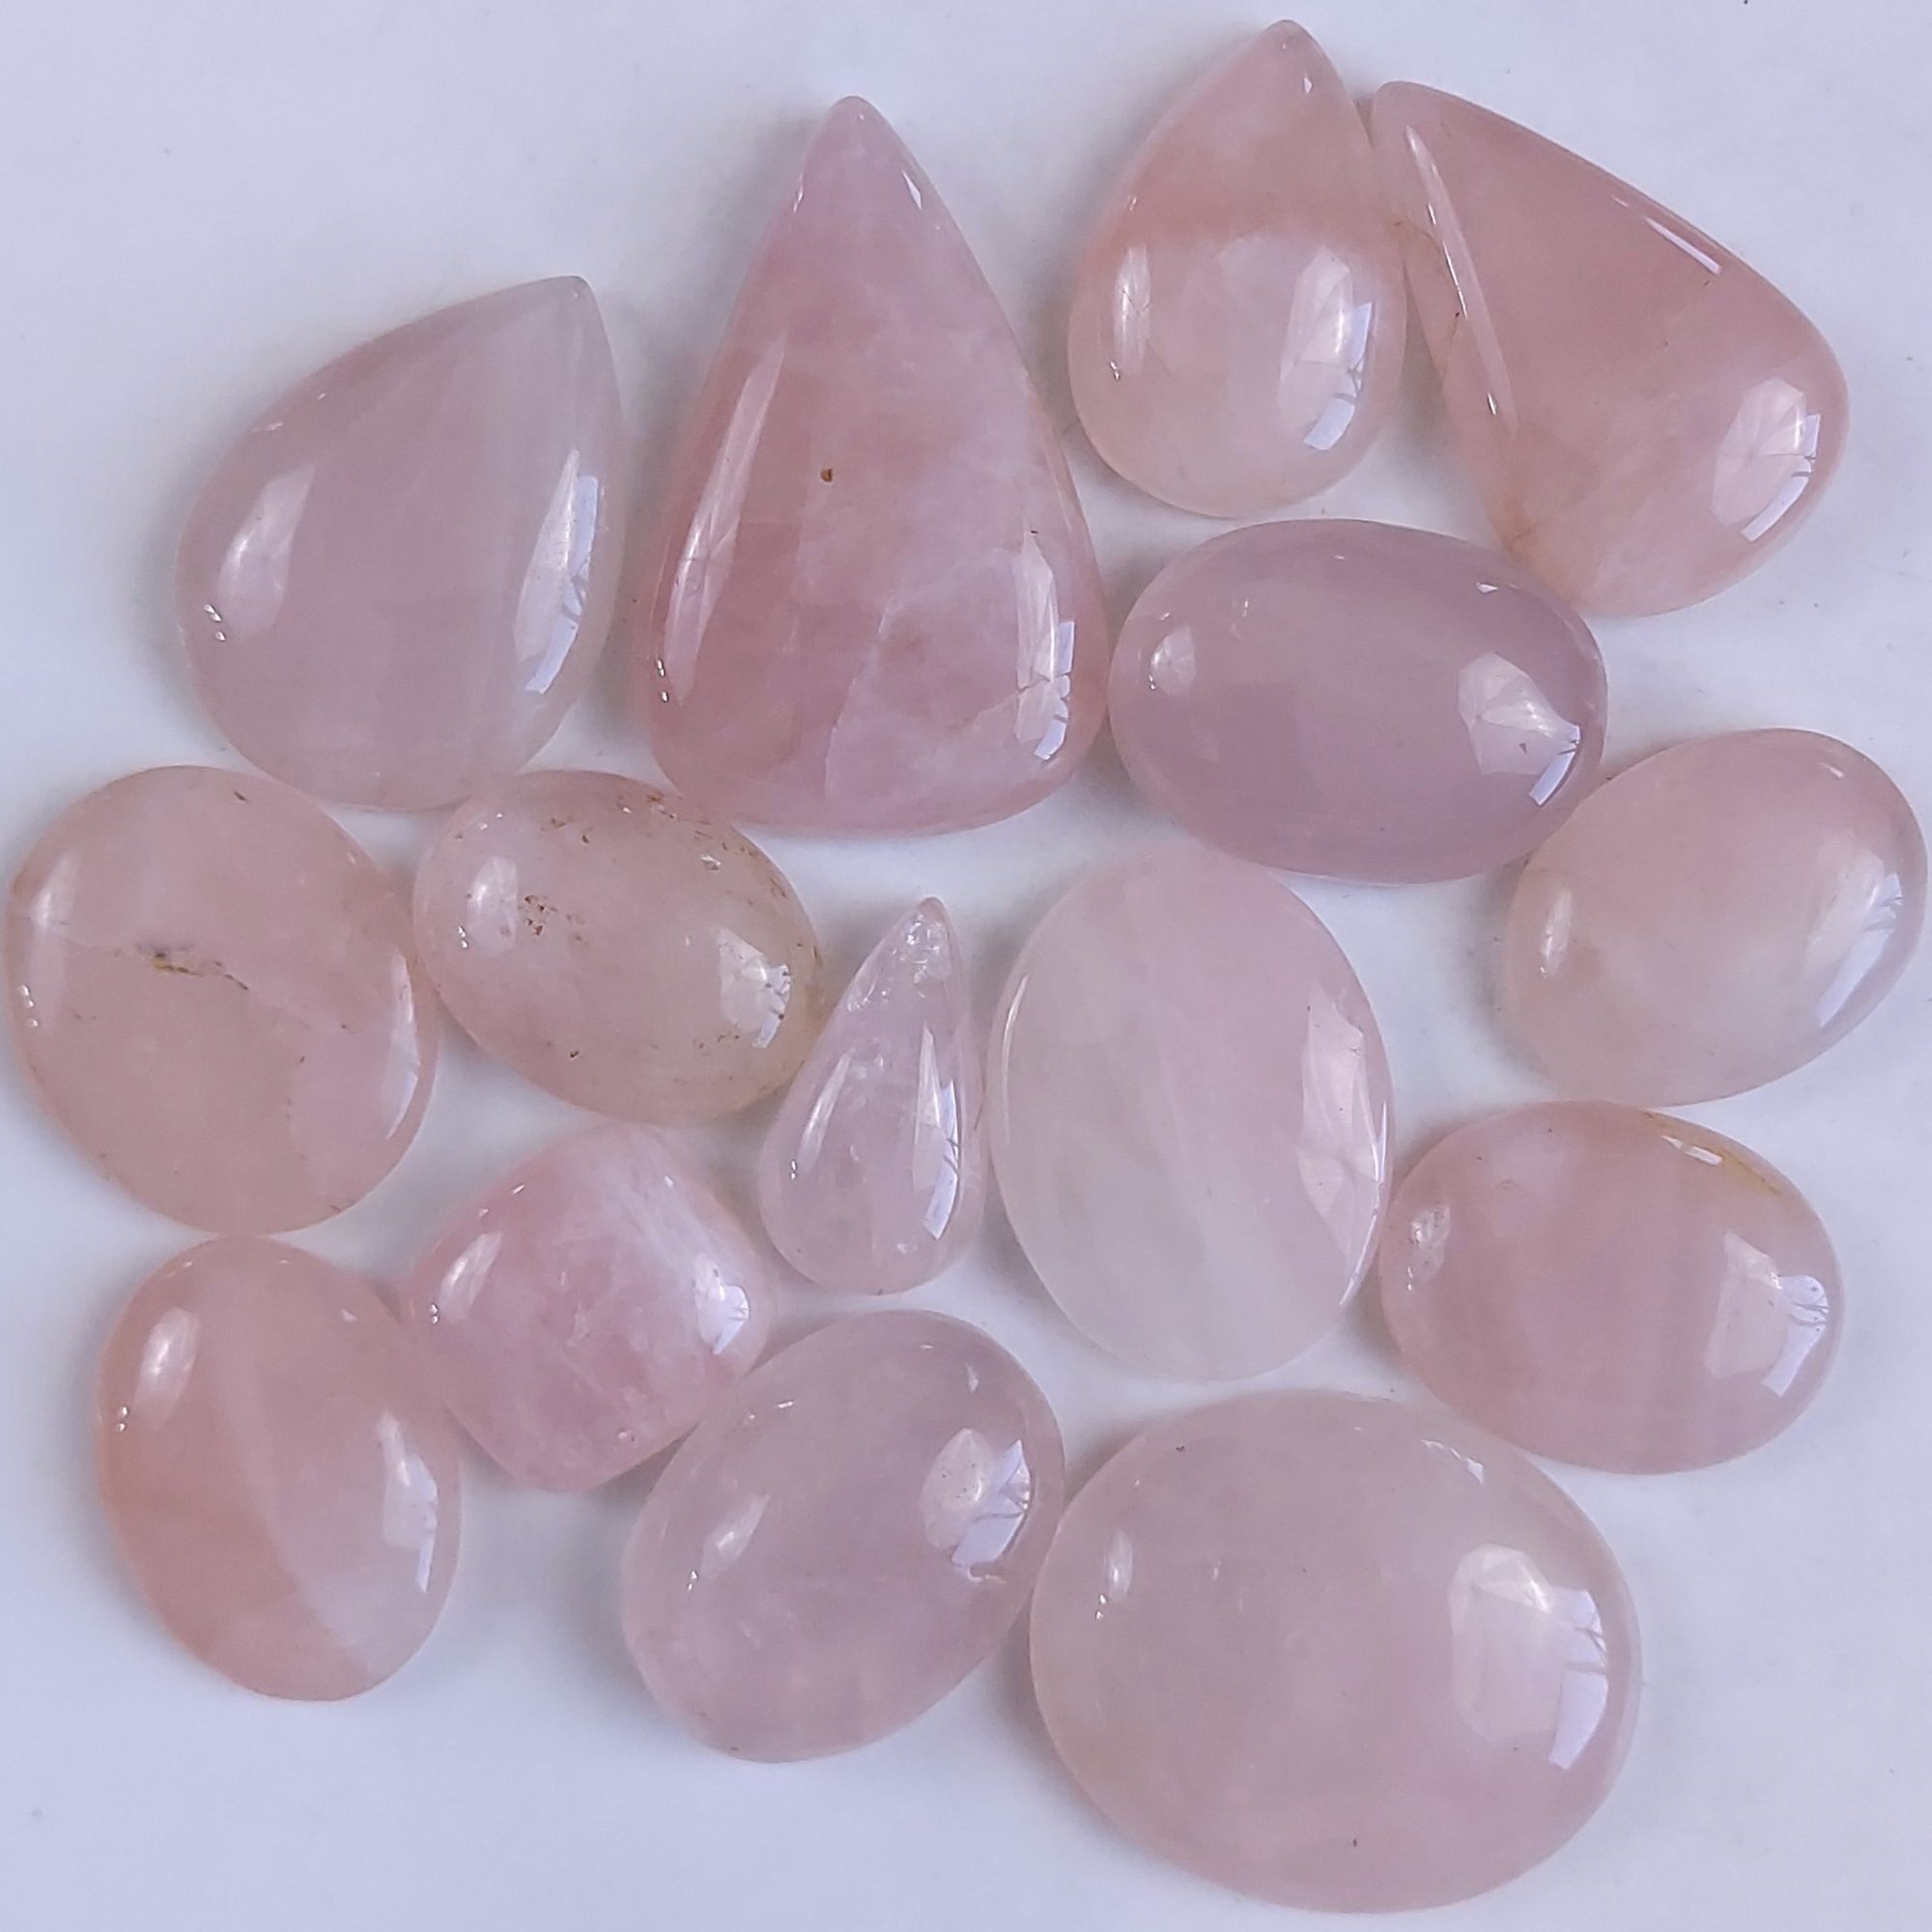 15Pcs 752Cts Natural Rose Quartz Loose Cabochon Gemstone Lot Mix Shape and and Size for Jewelry Making 45x30 20x20mm#1267